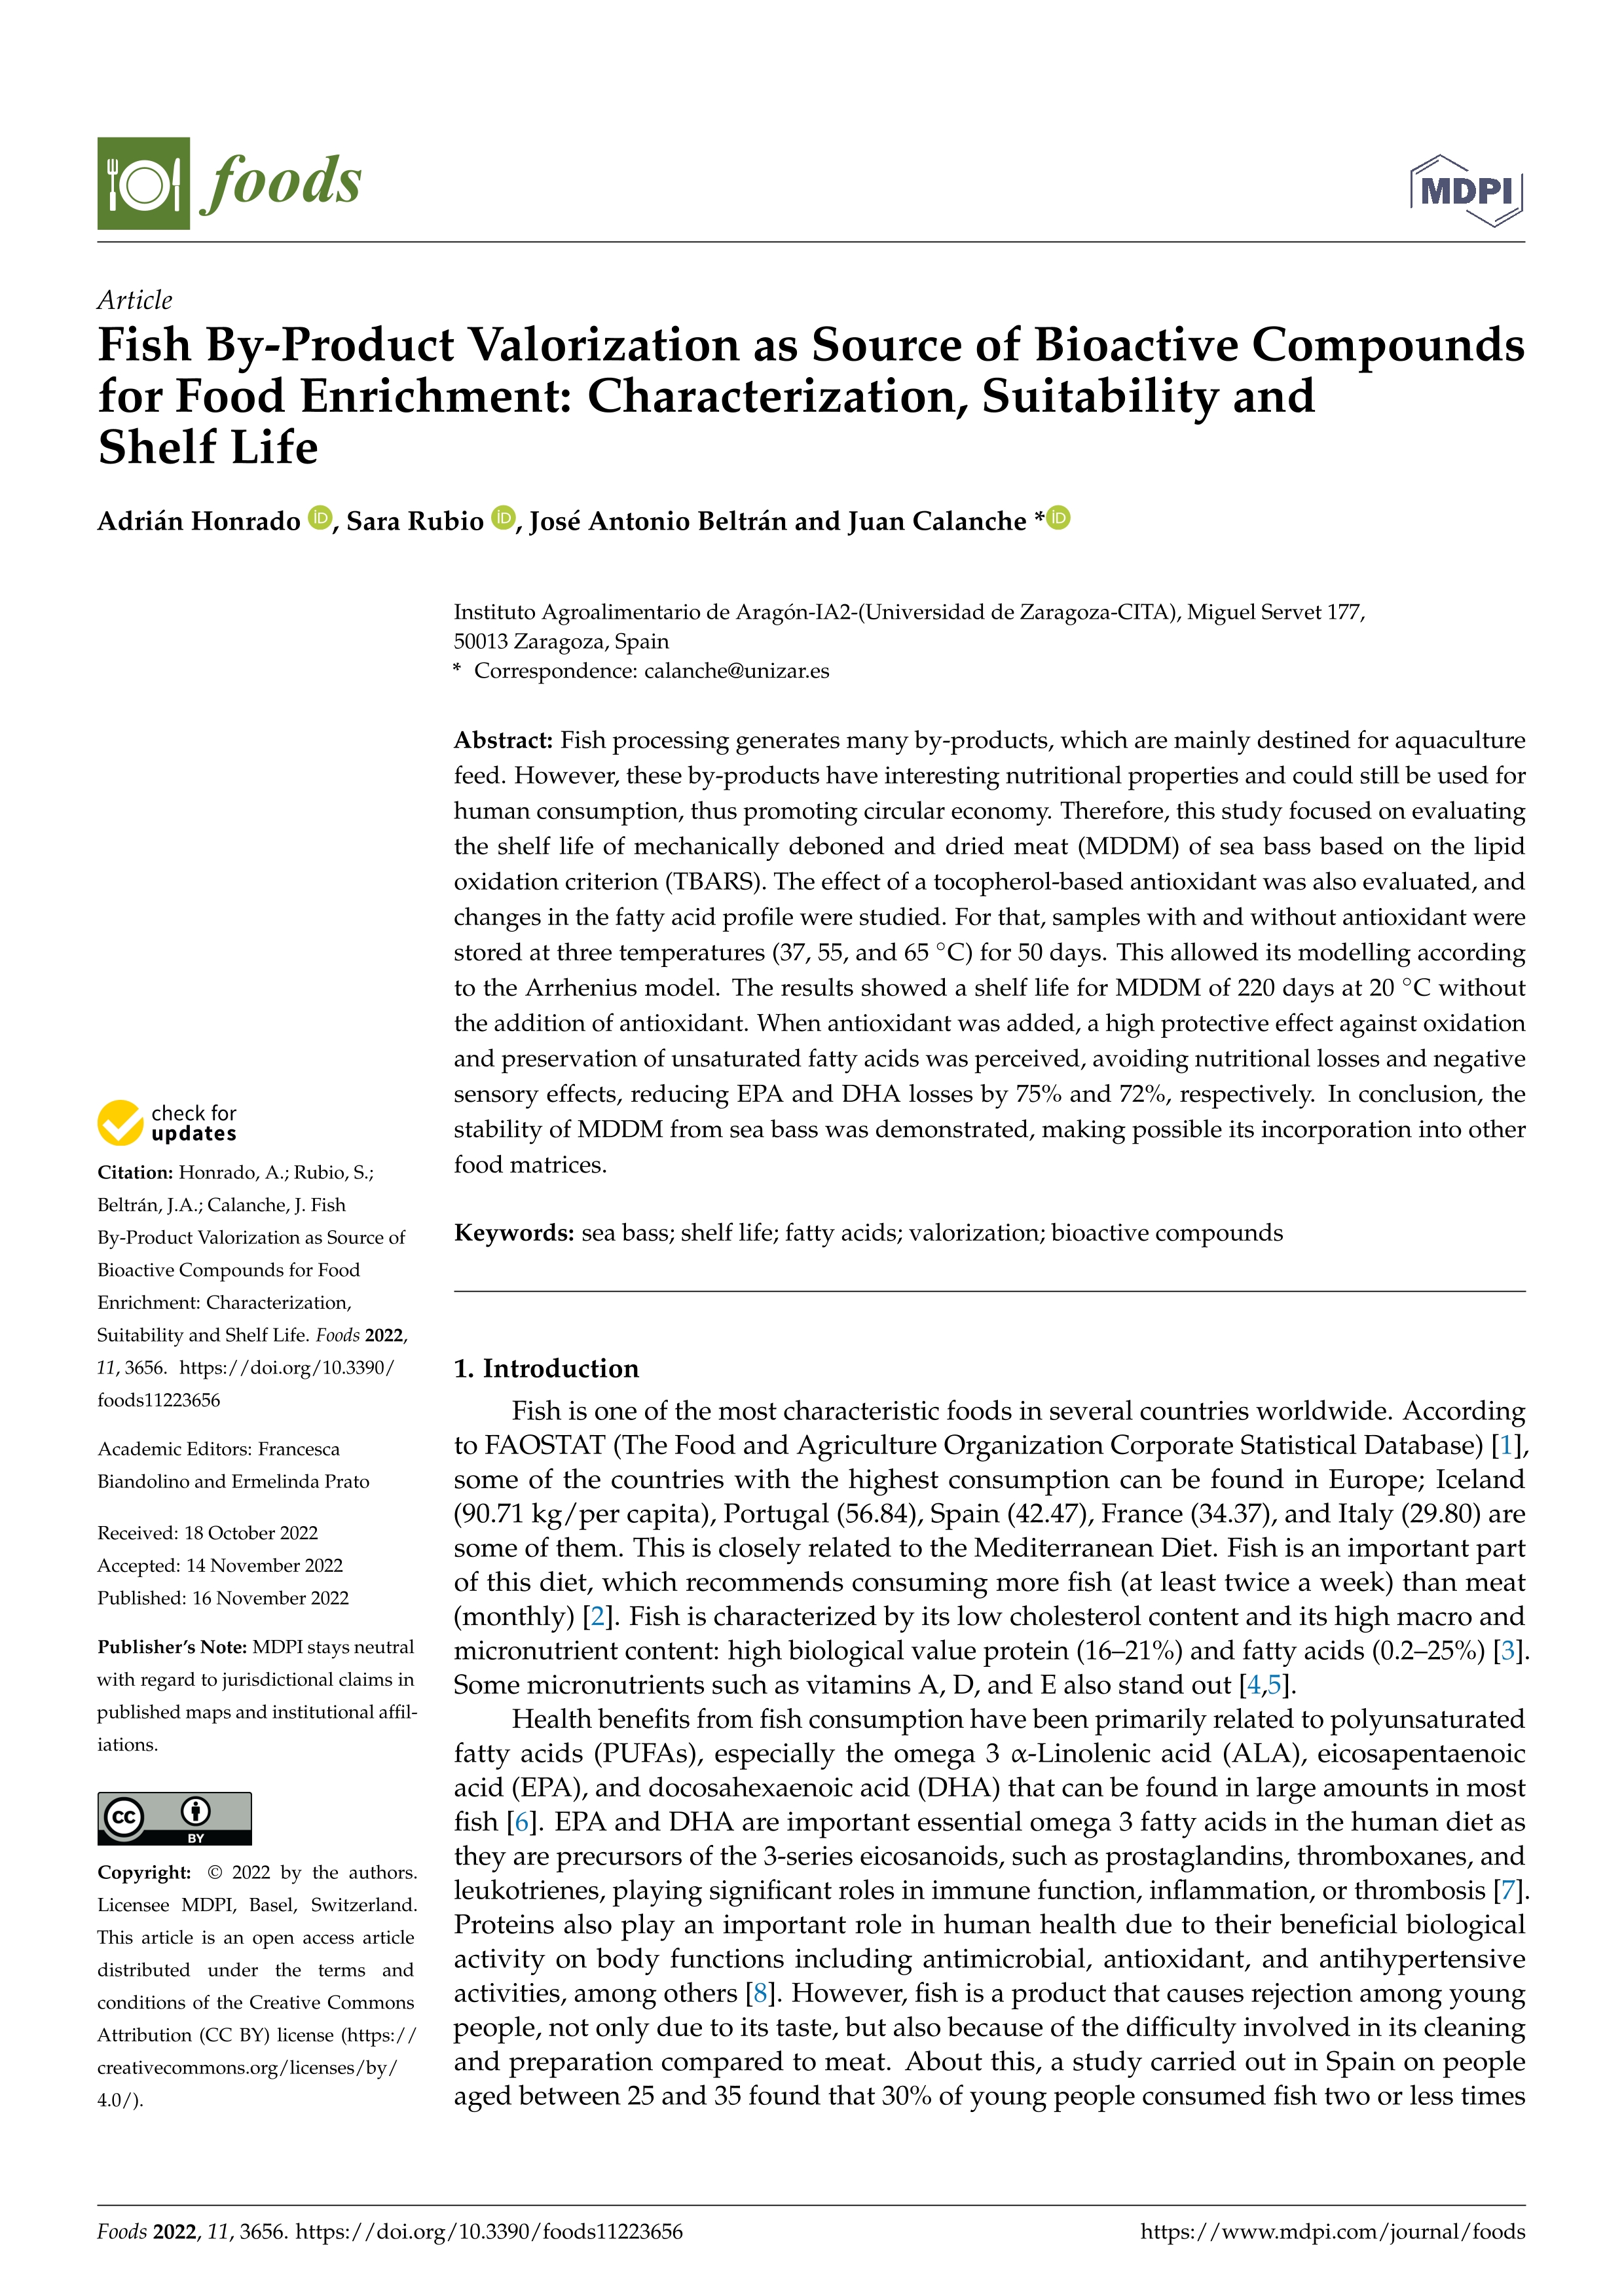 Fish By-Product Valorization as Source of Bioactive Compounds for Food Enrichment: Characterization, Suitability and Shelf Life